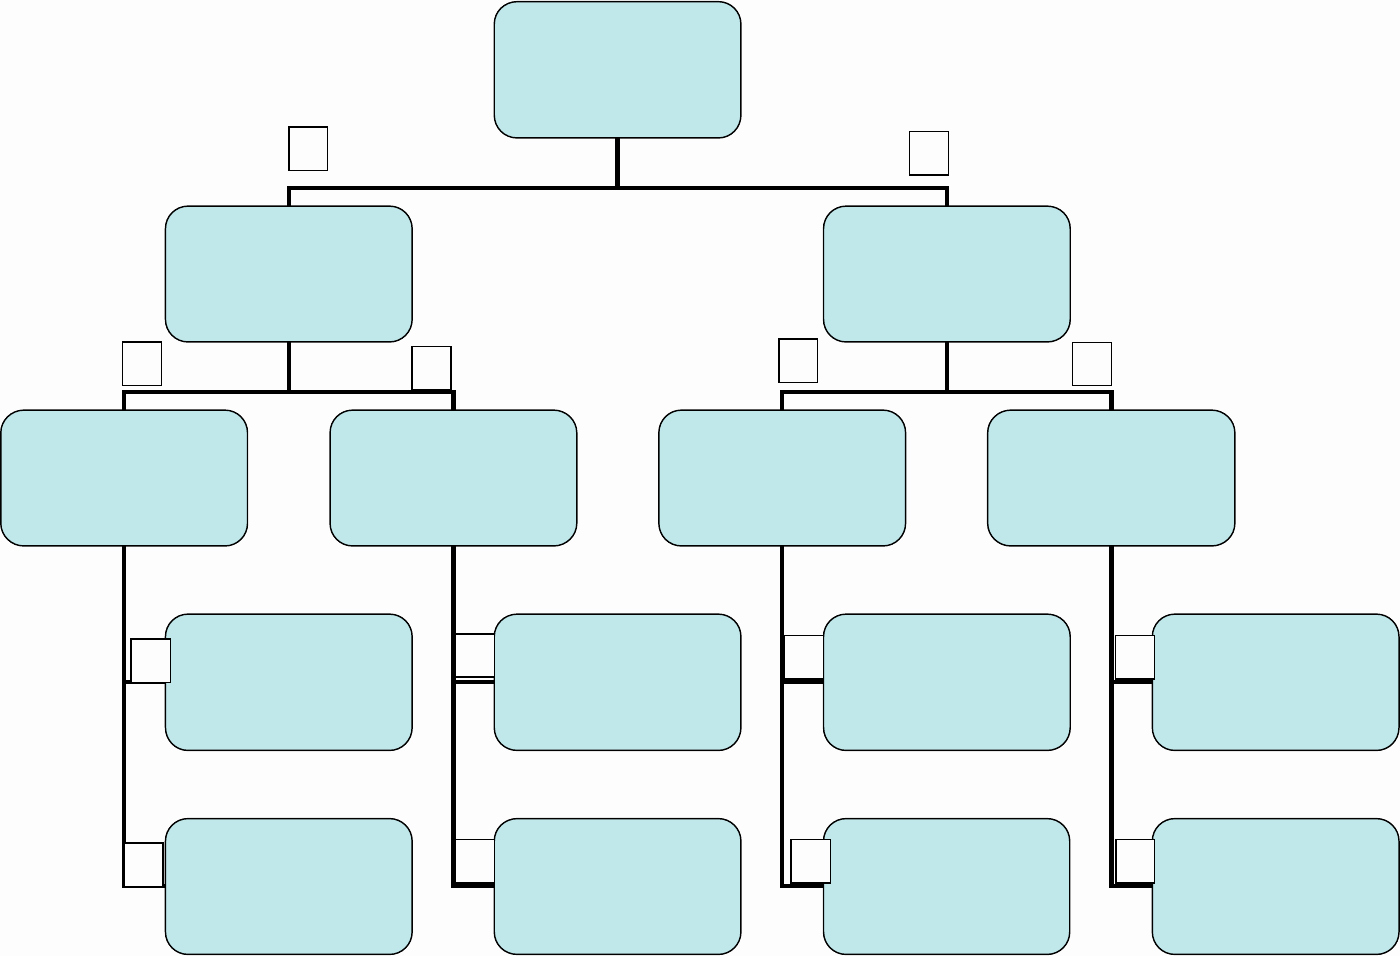 Call Tree Template Word New Decision Tree Template In Word and Pdf formats